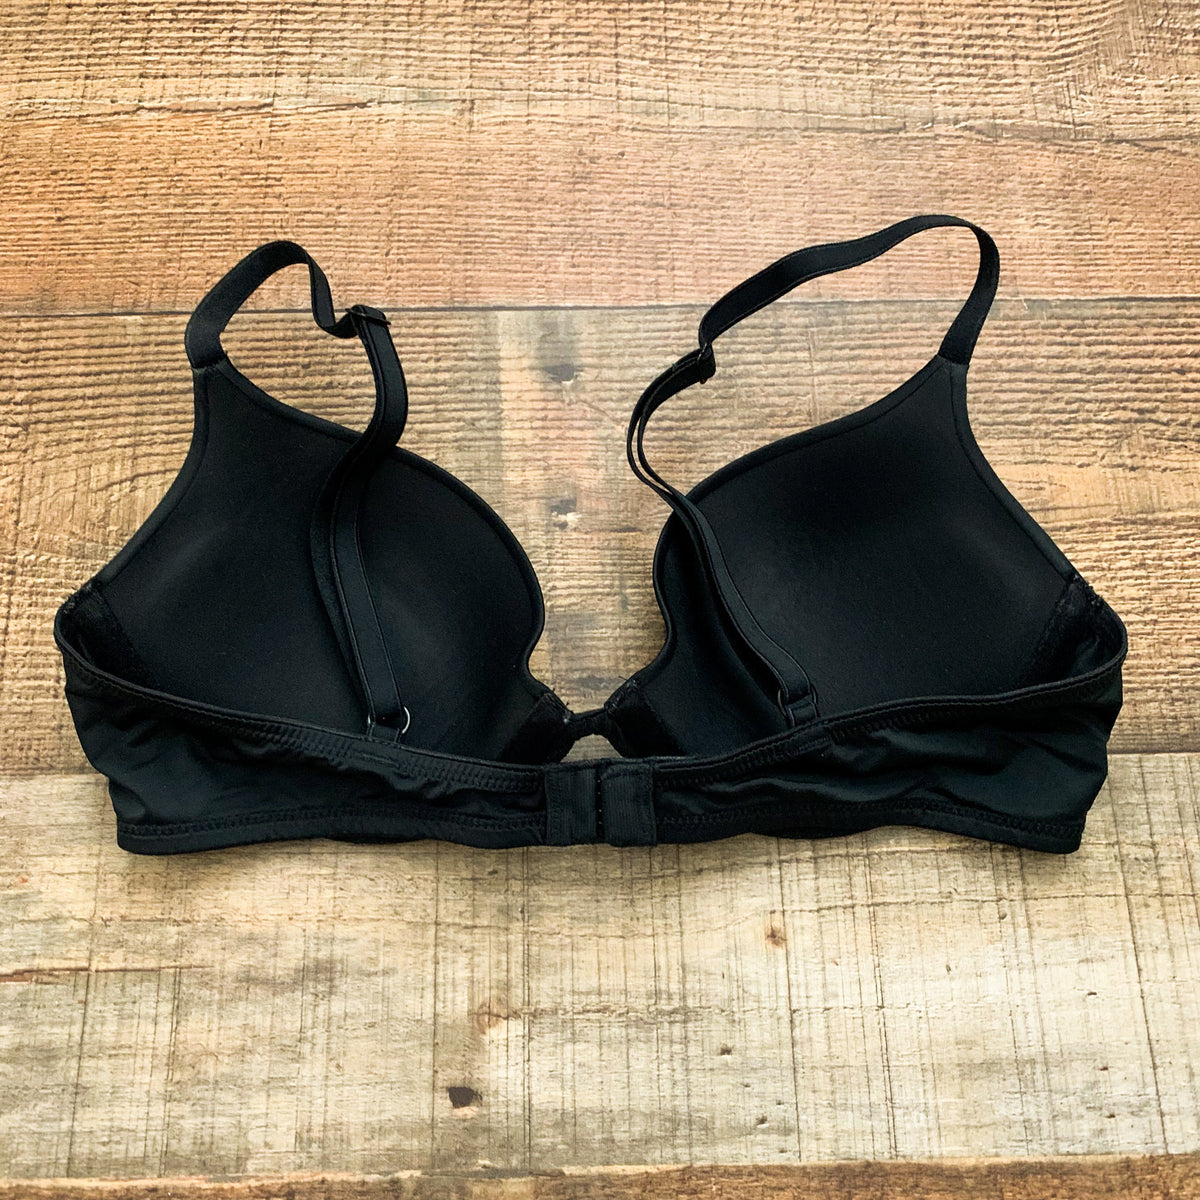 Calvin Klein Black Push-Up Bra- Size 32B – The Saved Collection